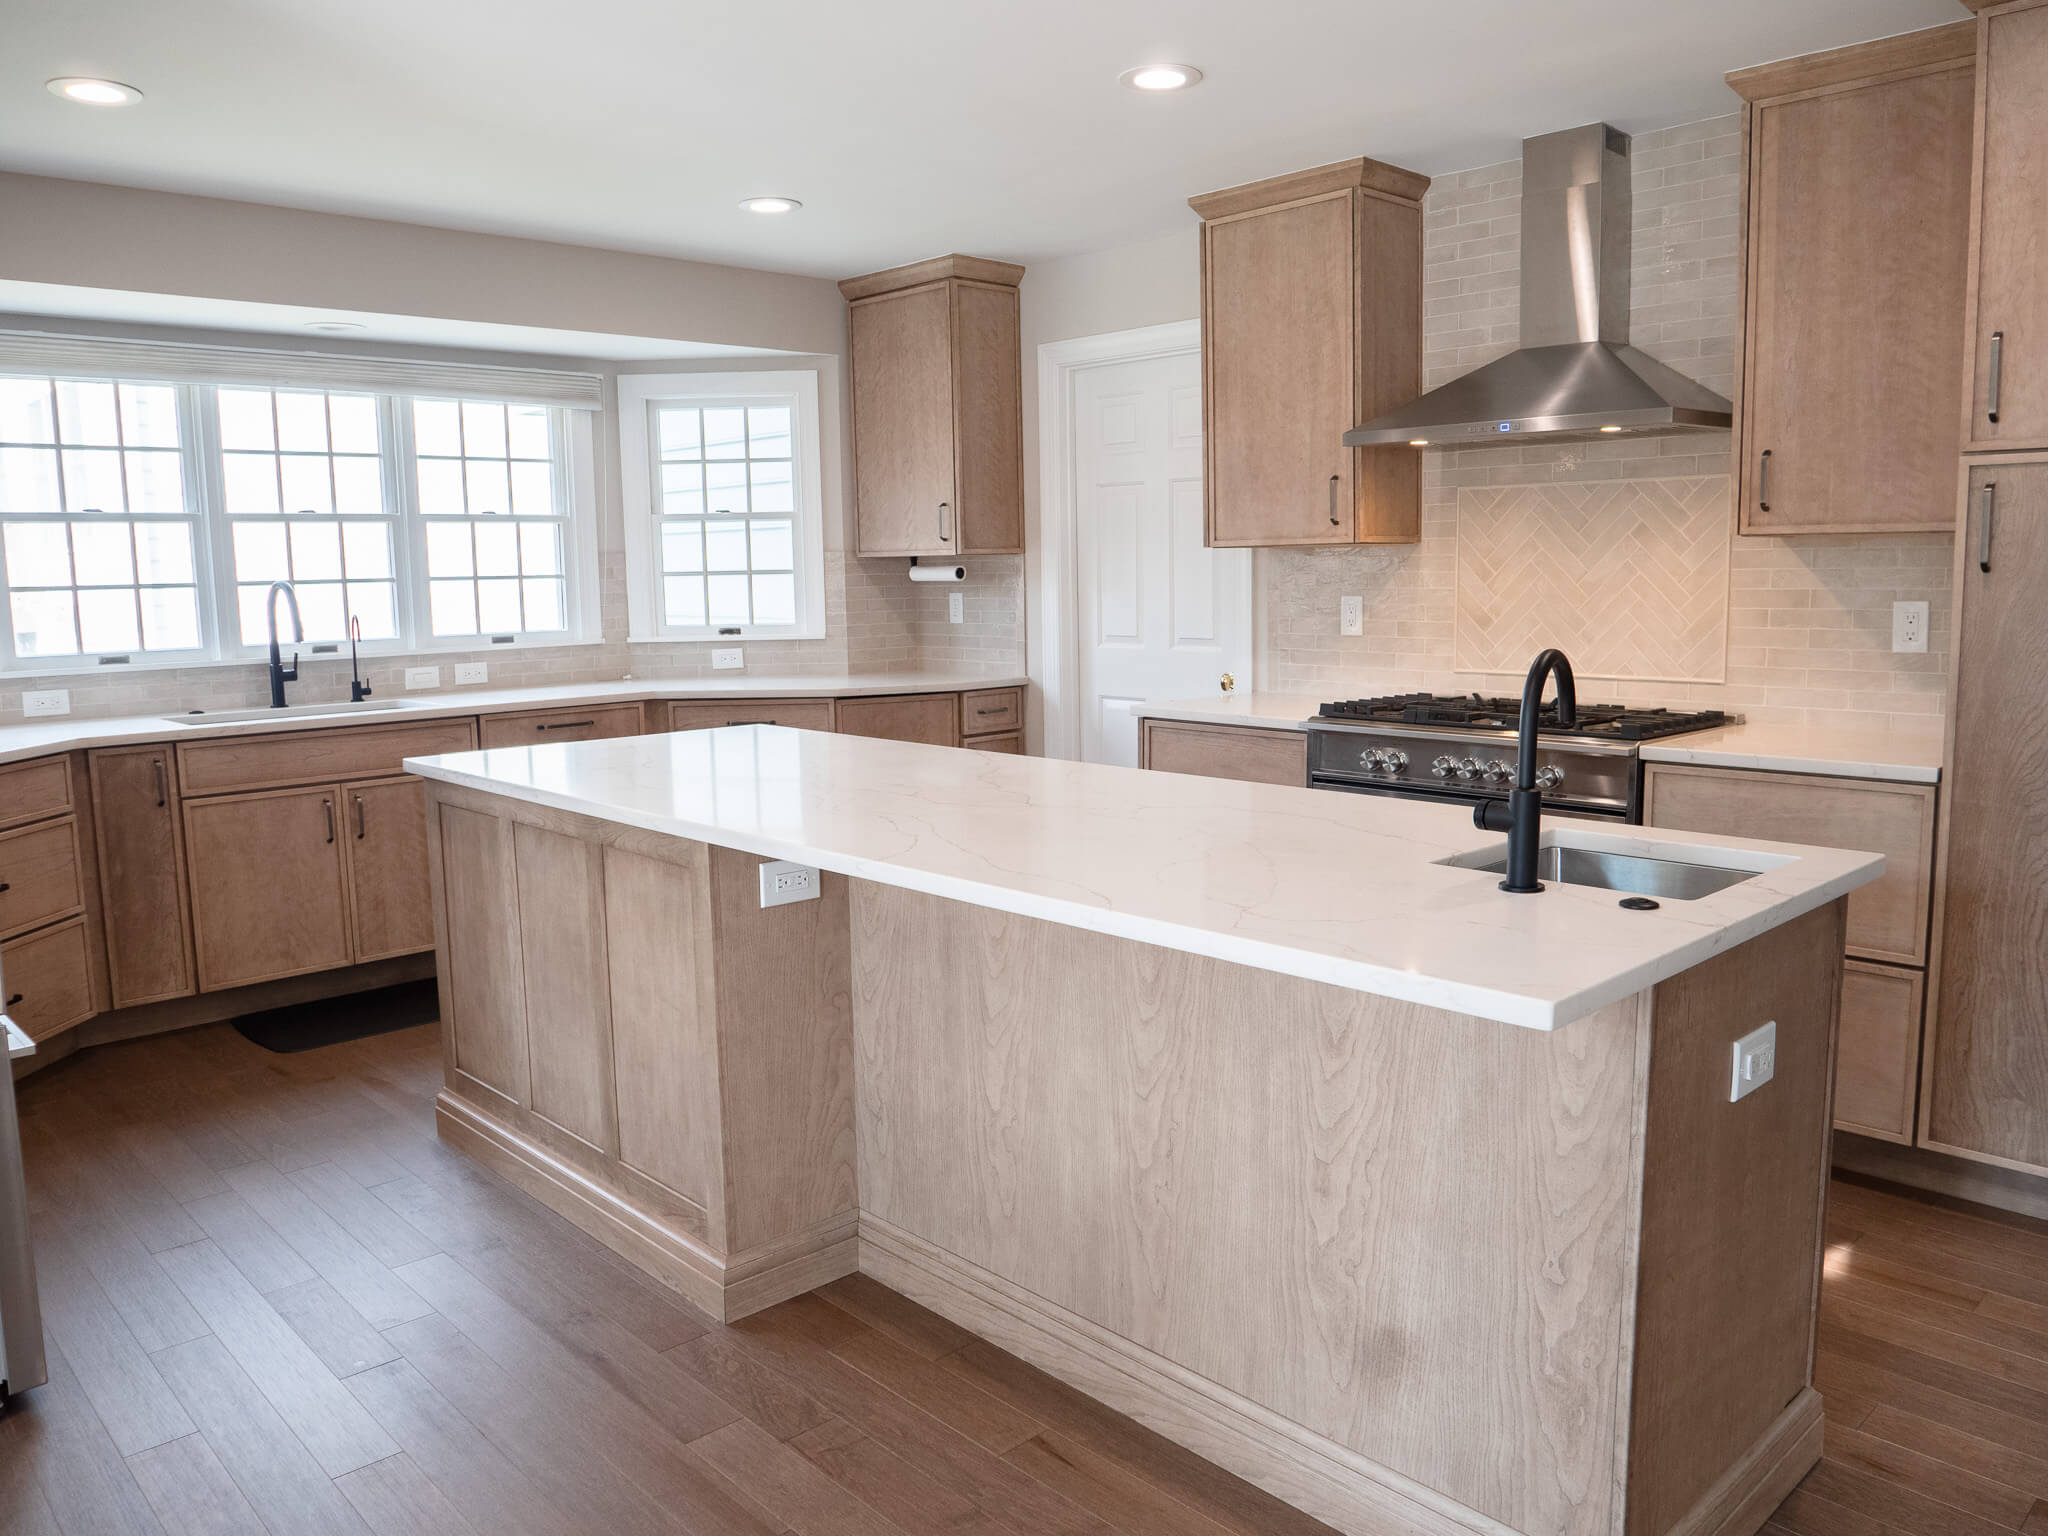 wide-angle showing marble countertop with sink in the middle and the cabinets and hood at the sides